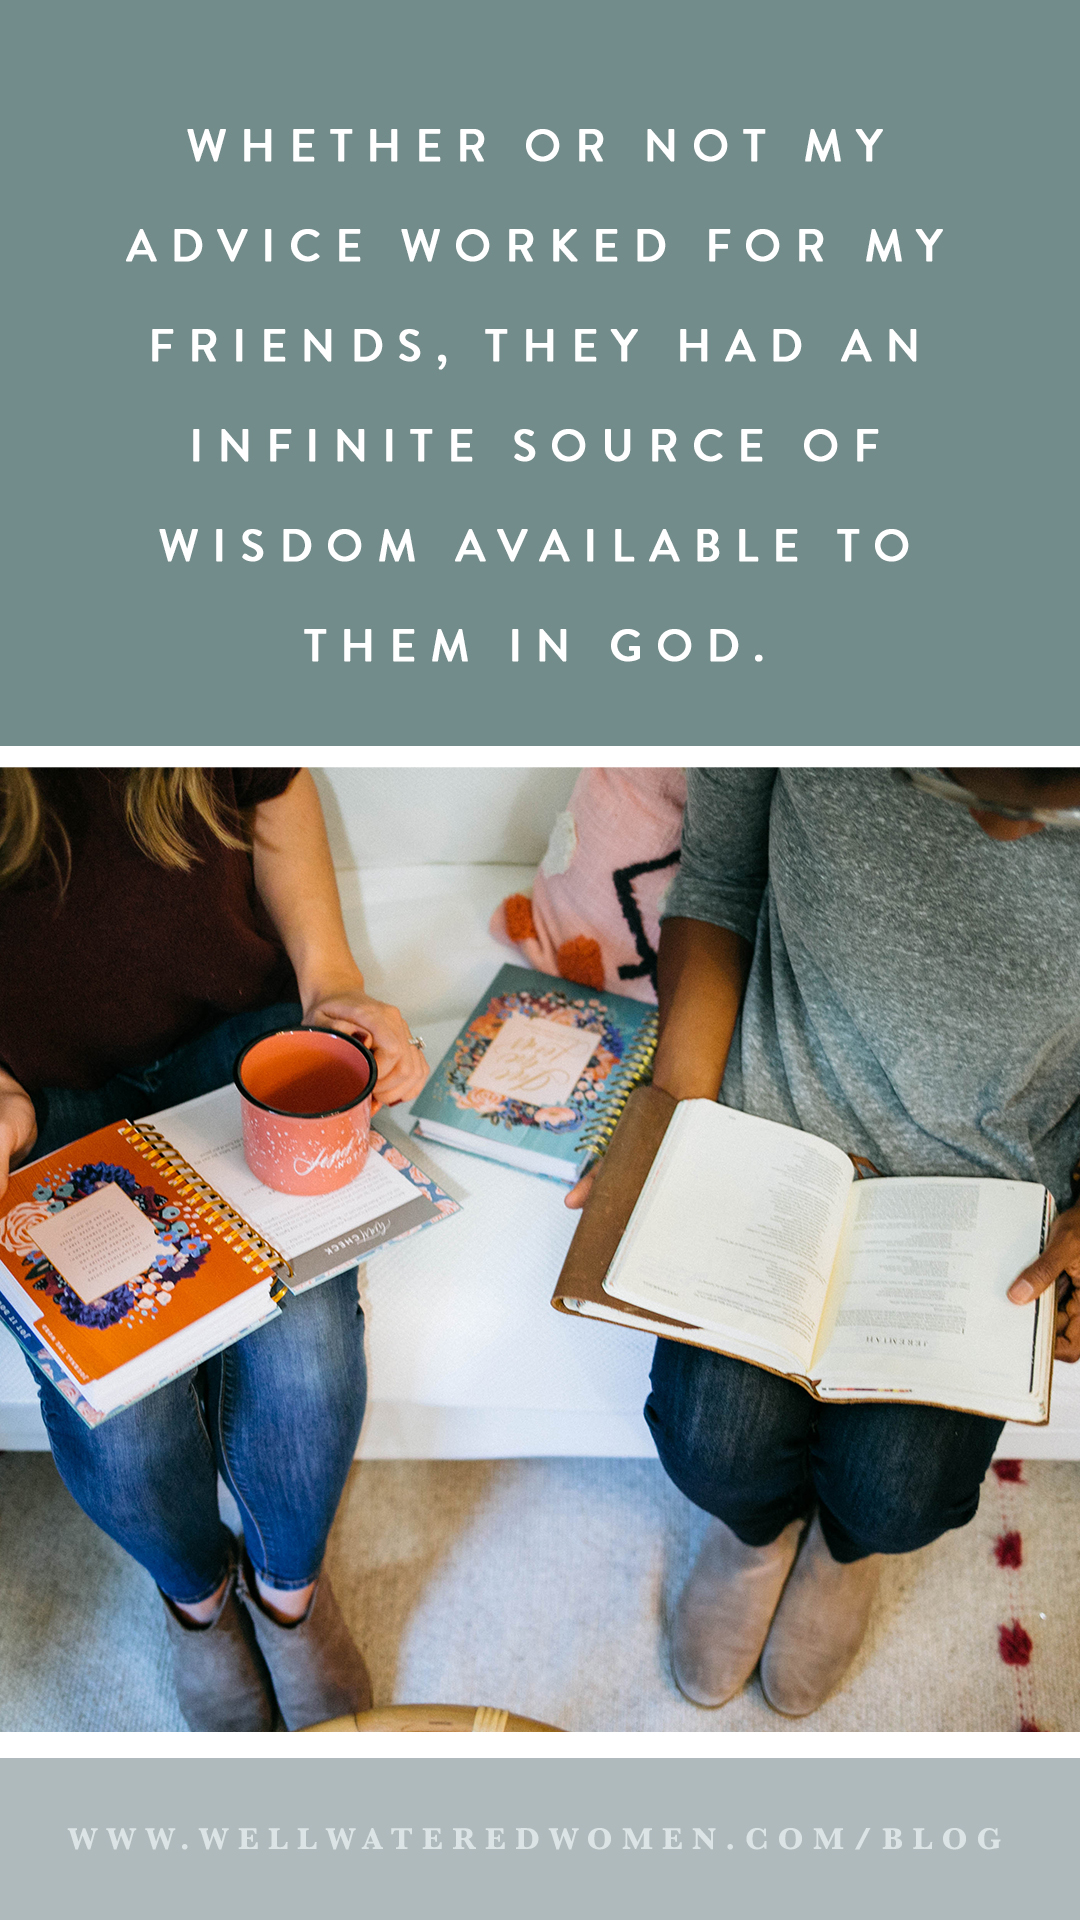 Yes, I shared some things that have worked for us, but it was so sweet to know that whether or not my advice worked for them, they had an infinite source of wisdom available to them in God, just as I did. And all we had to do was seek Him to find it.